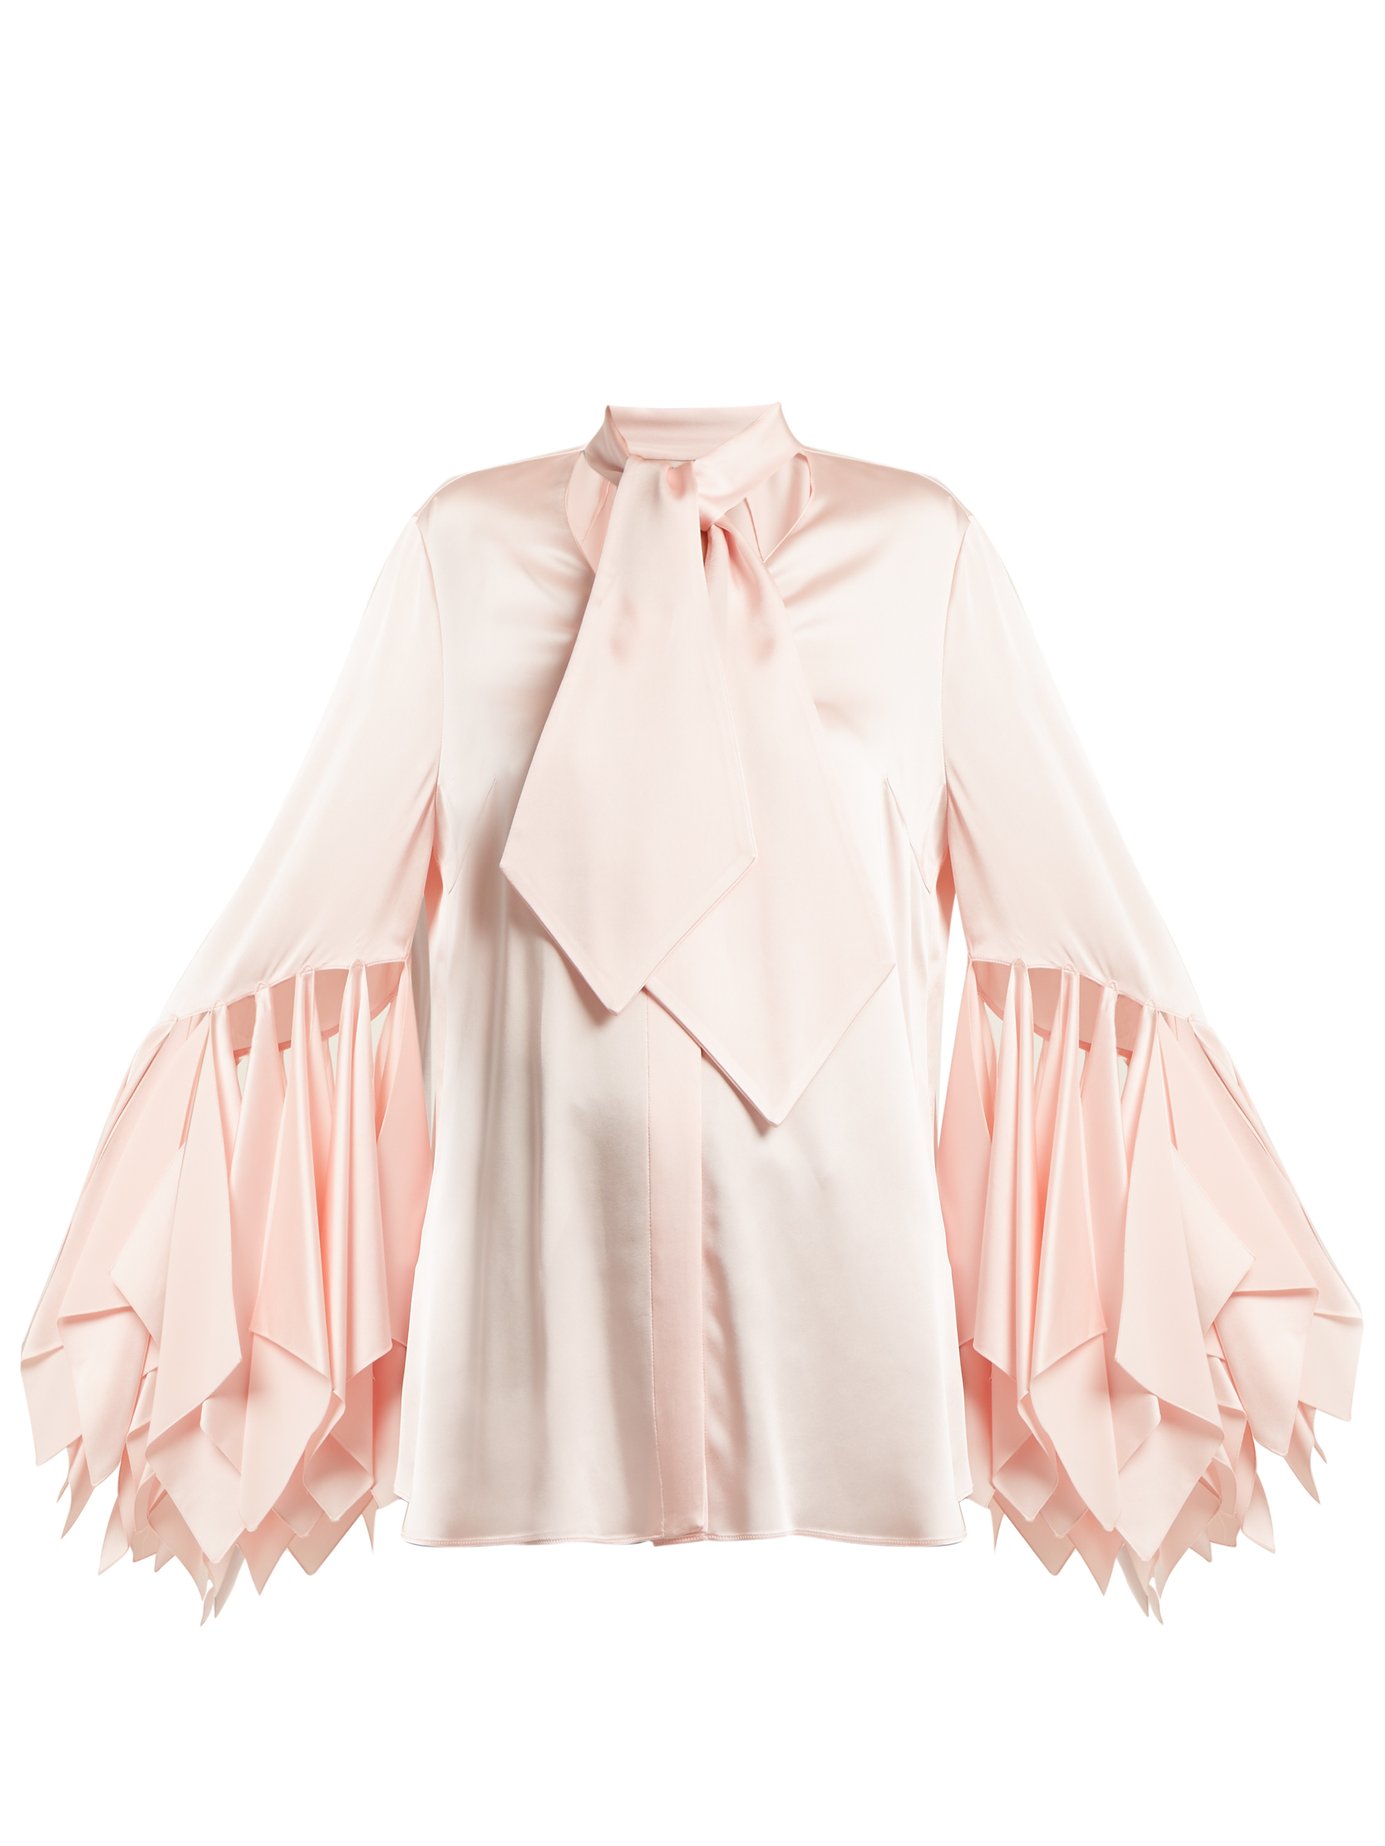 Christopher Kane - Handkerchief-Sleeve Satin Blouse | ABOUT ICONS